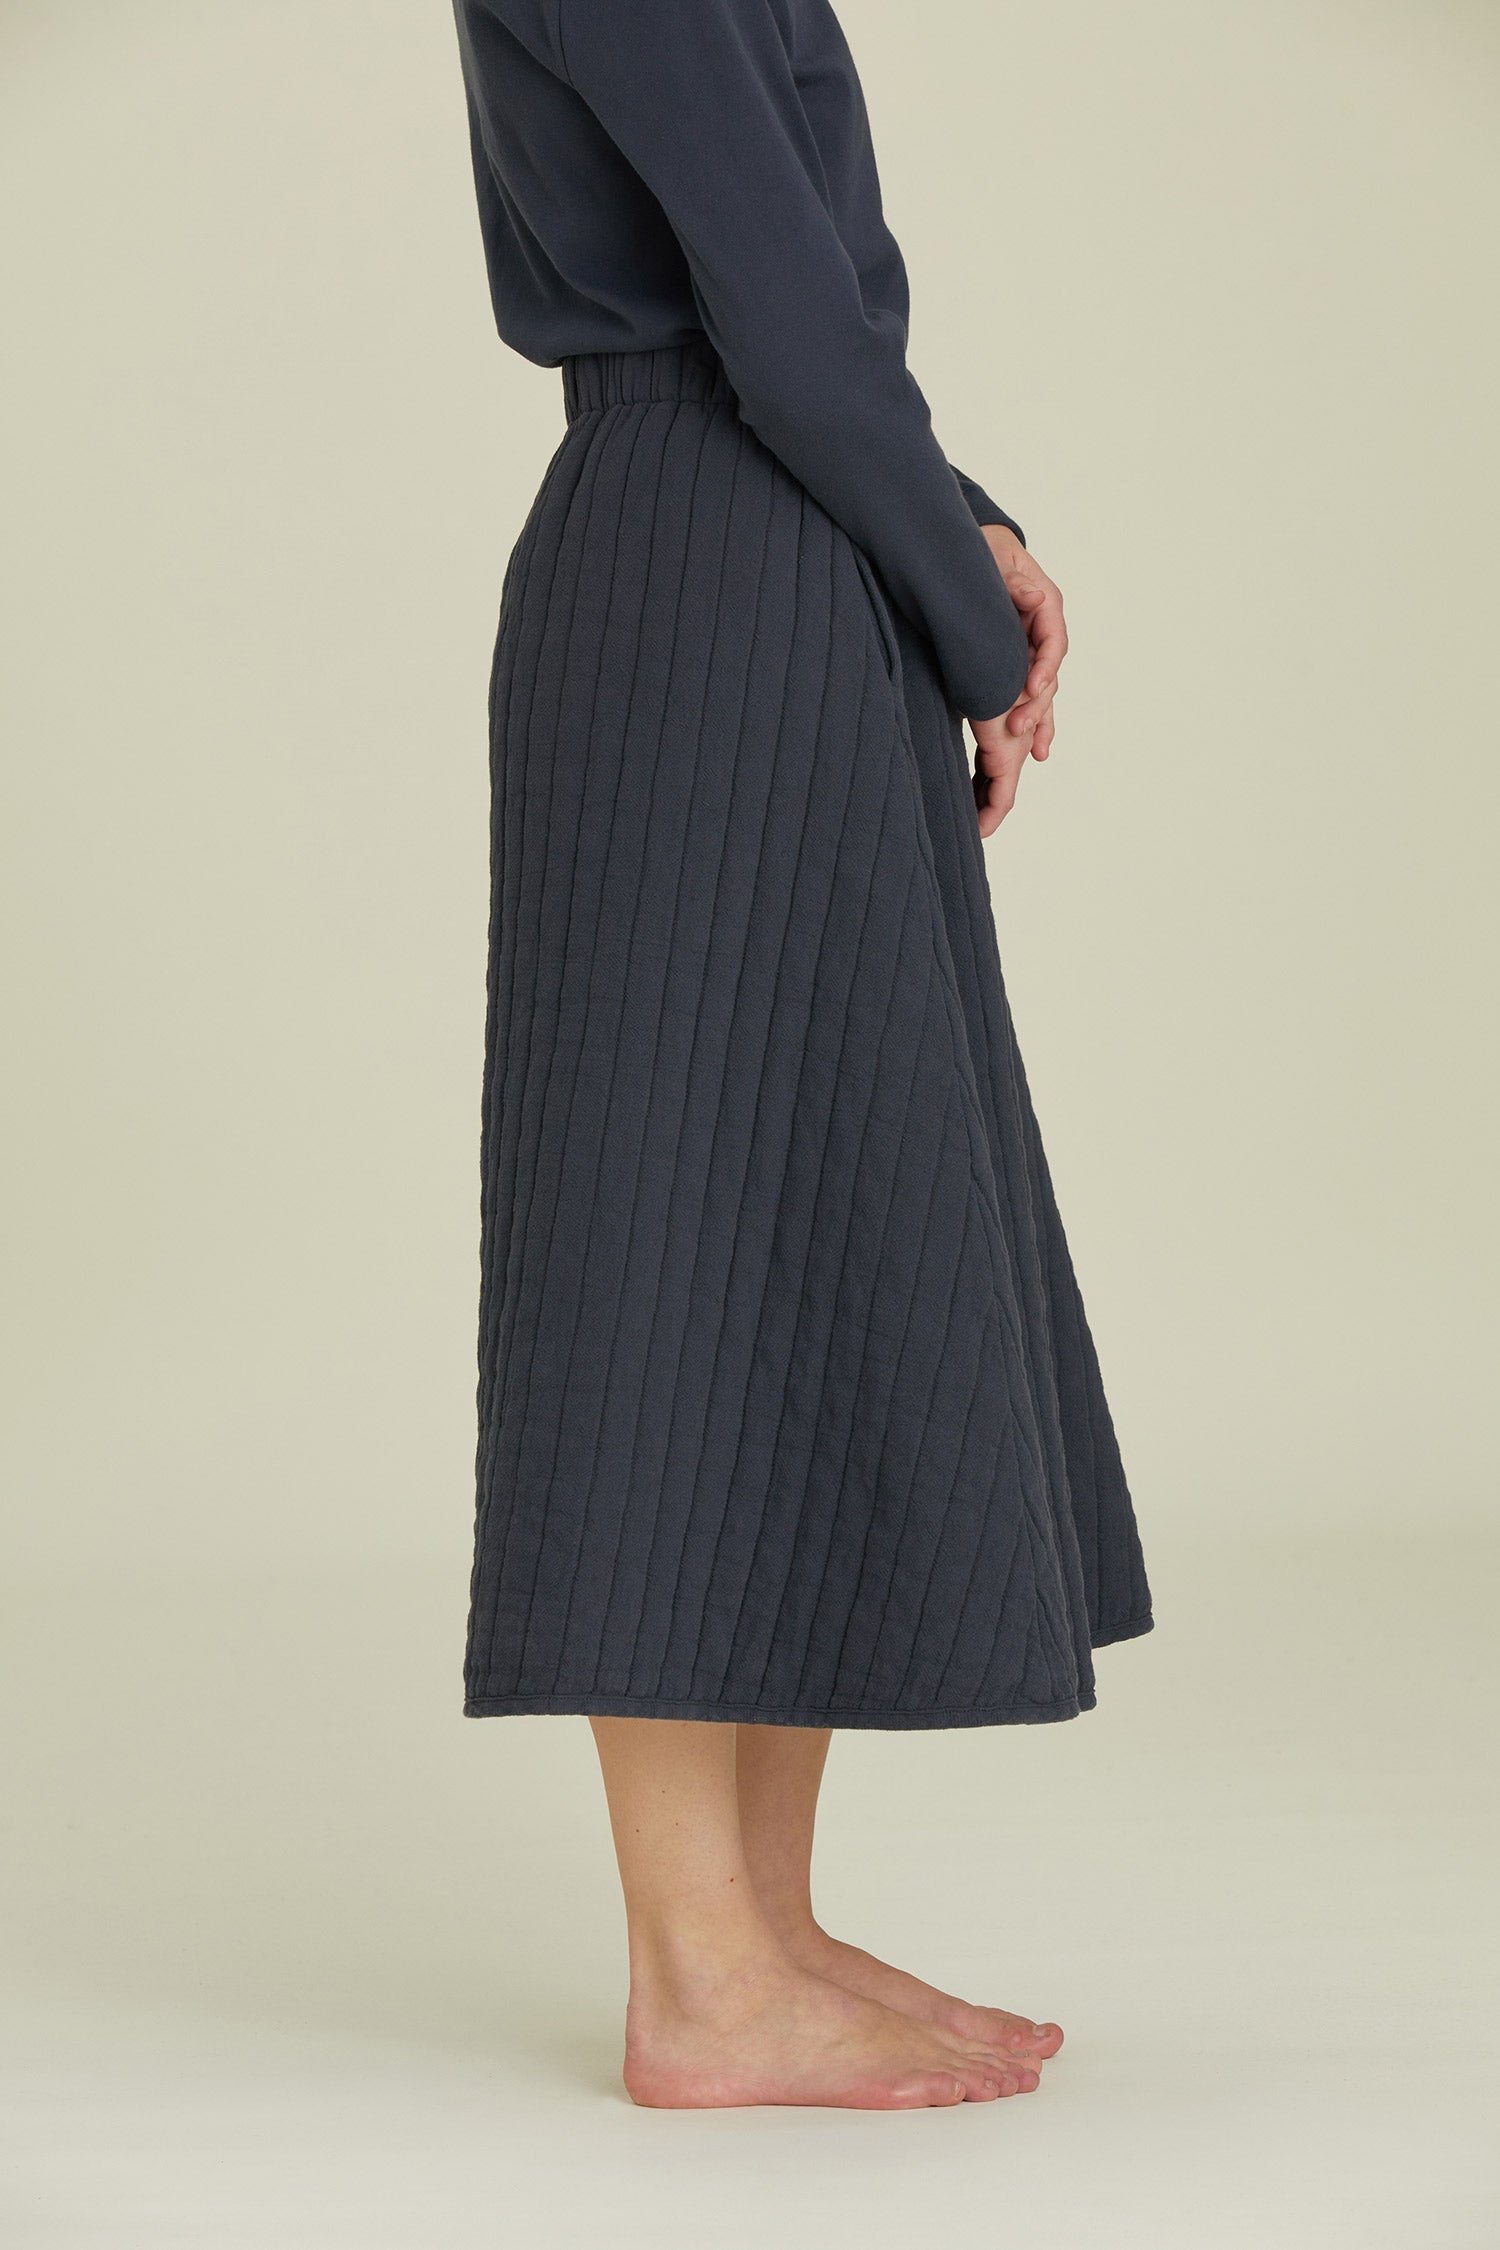 QUILTED SKIRT / DK. NAVY